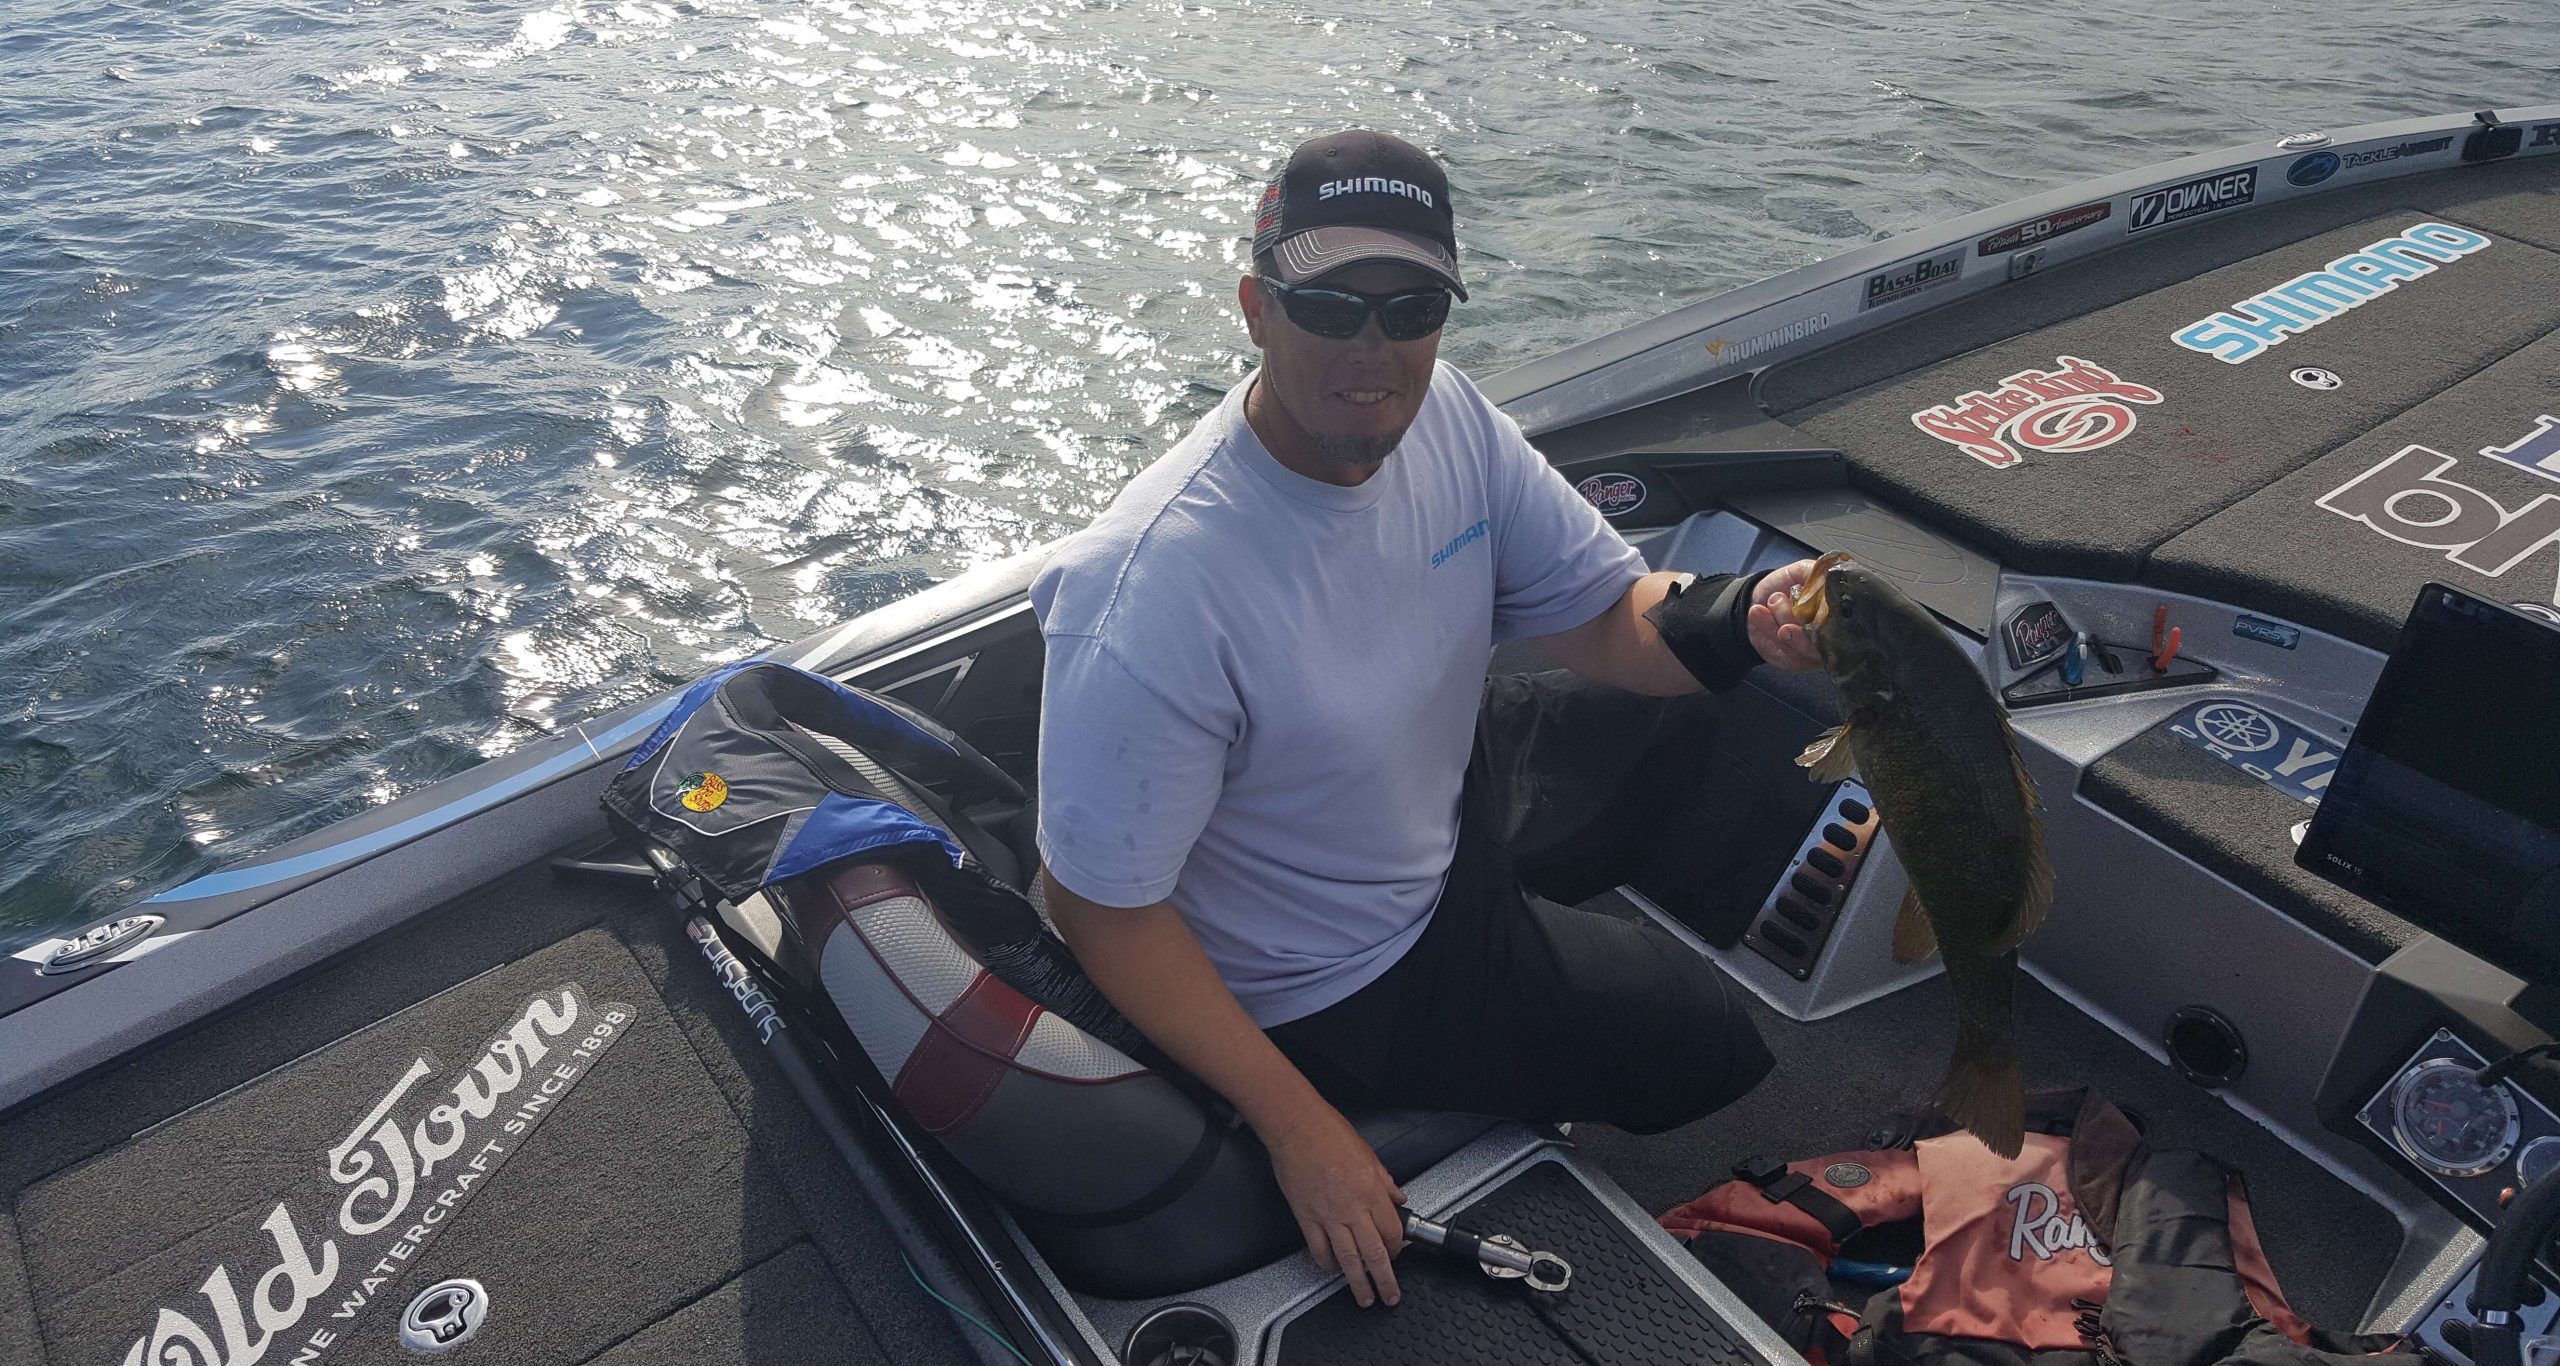 Two quick culls, to keep things interesting. He really seems like he has things dialed in. With the weights that some people have brought in, he still feels like he needs to upgrade a few more fish. There's a lot on the line, with this being the last regular season event of the year.
